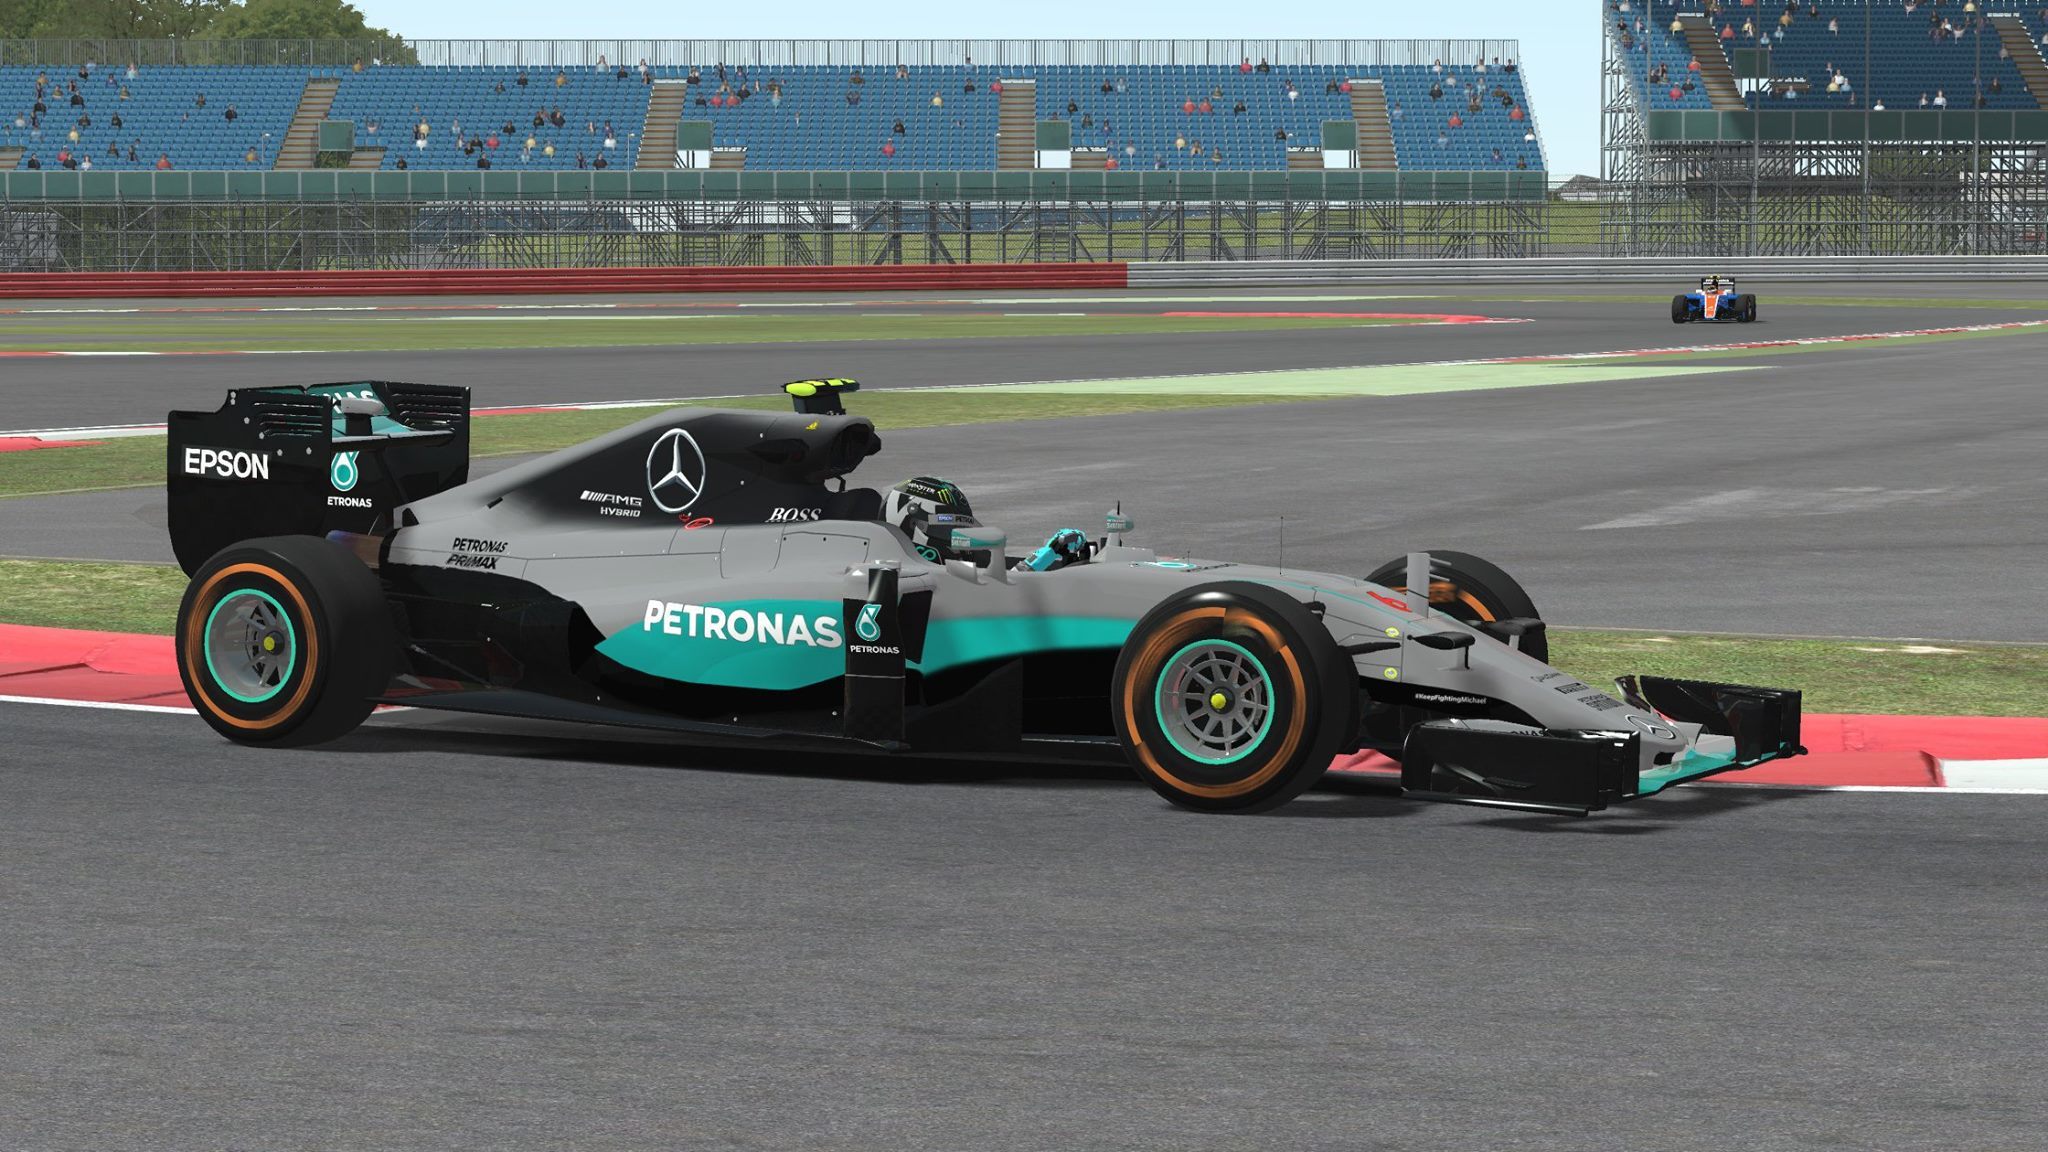 More information about "rFactor 2: F1 2016 Mod by Frenky"